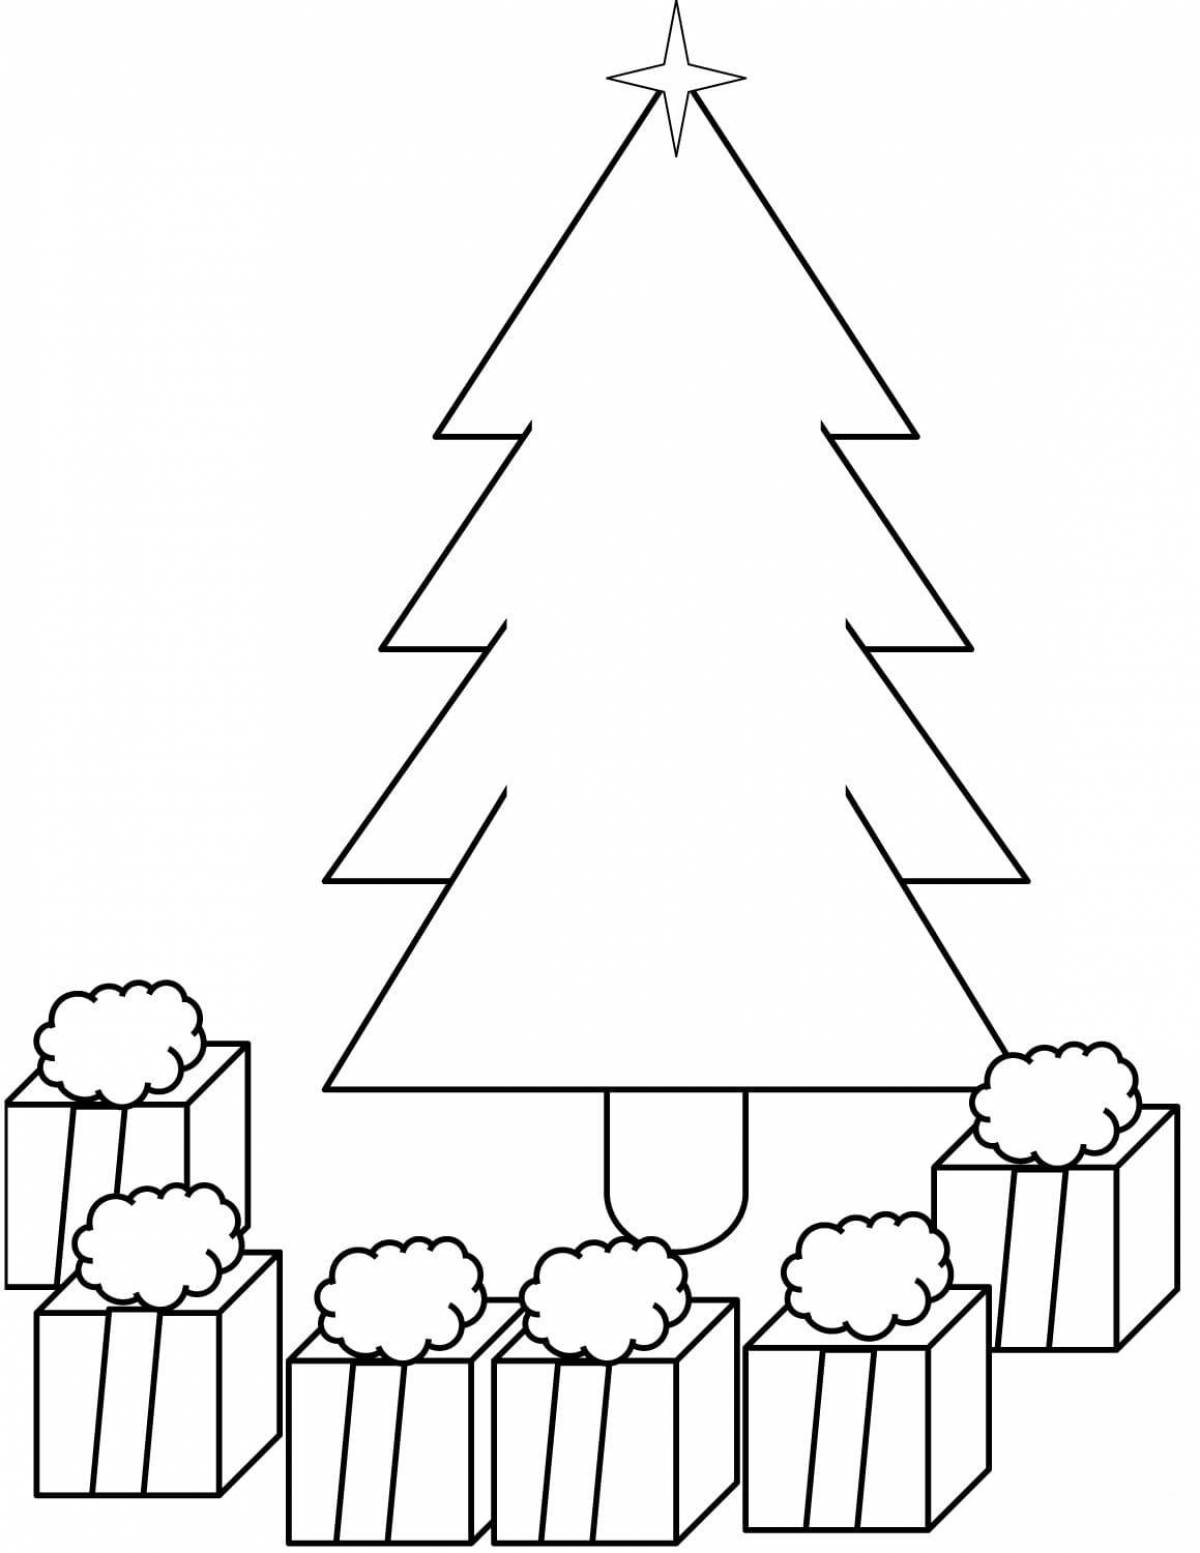 Coloring big Christmas tree for children 3-4 years old